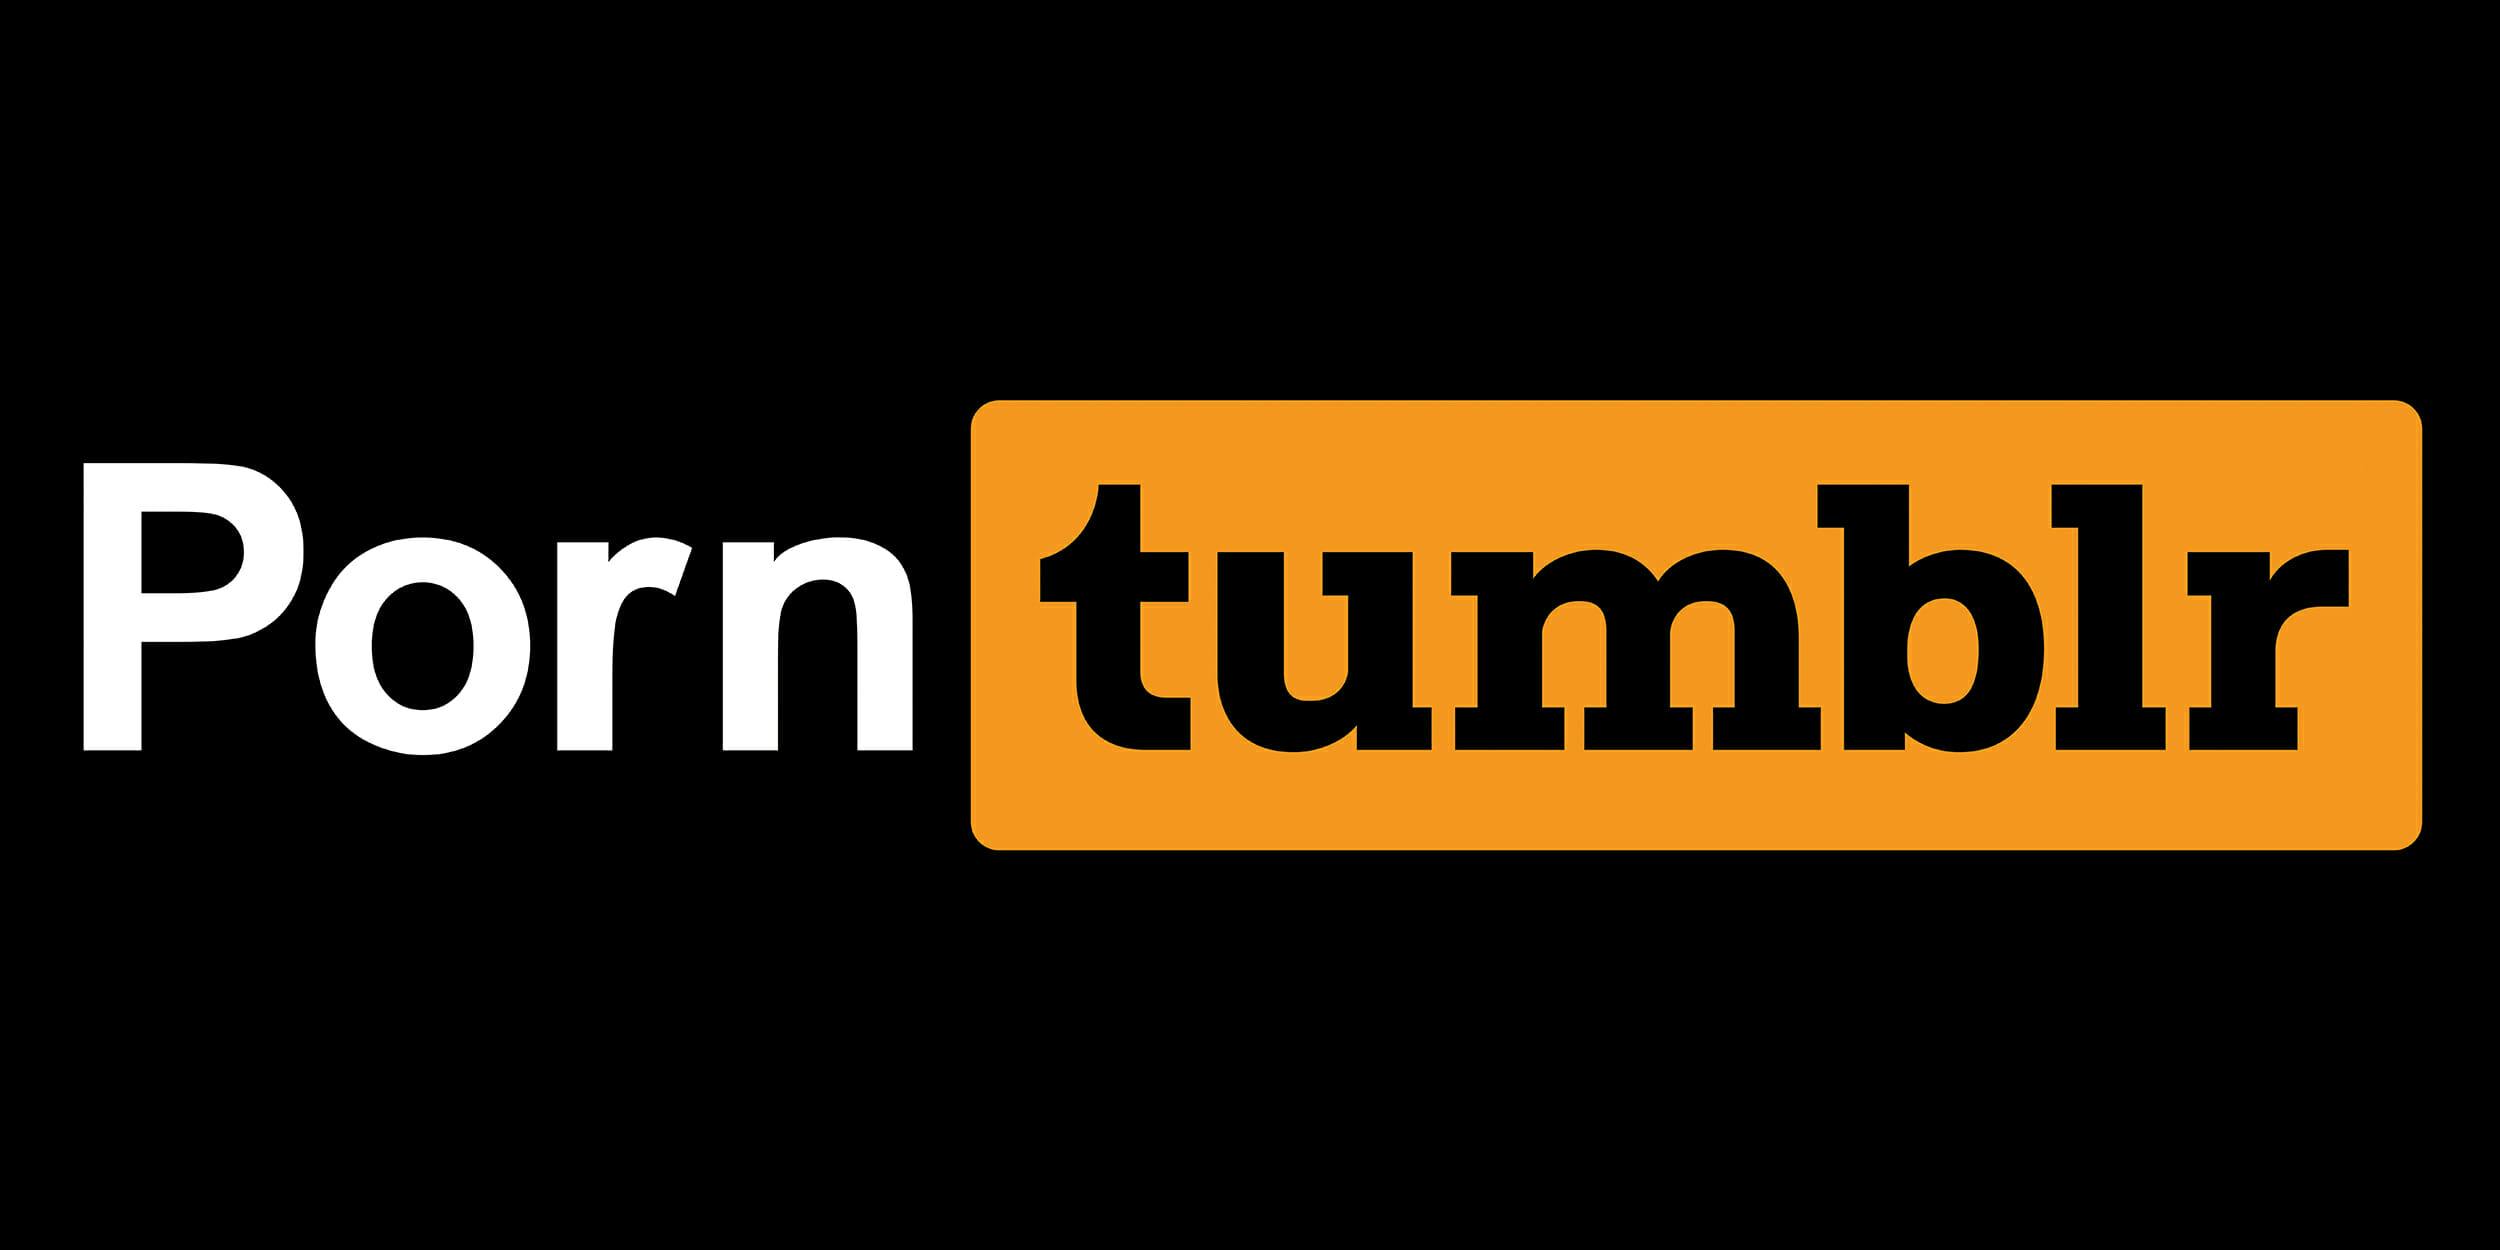 Sex Pronouns - Pornhub Won't Save Tumblr, Sex Workers, or Porn - The Daily Dot